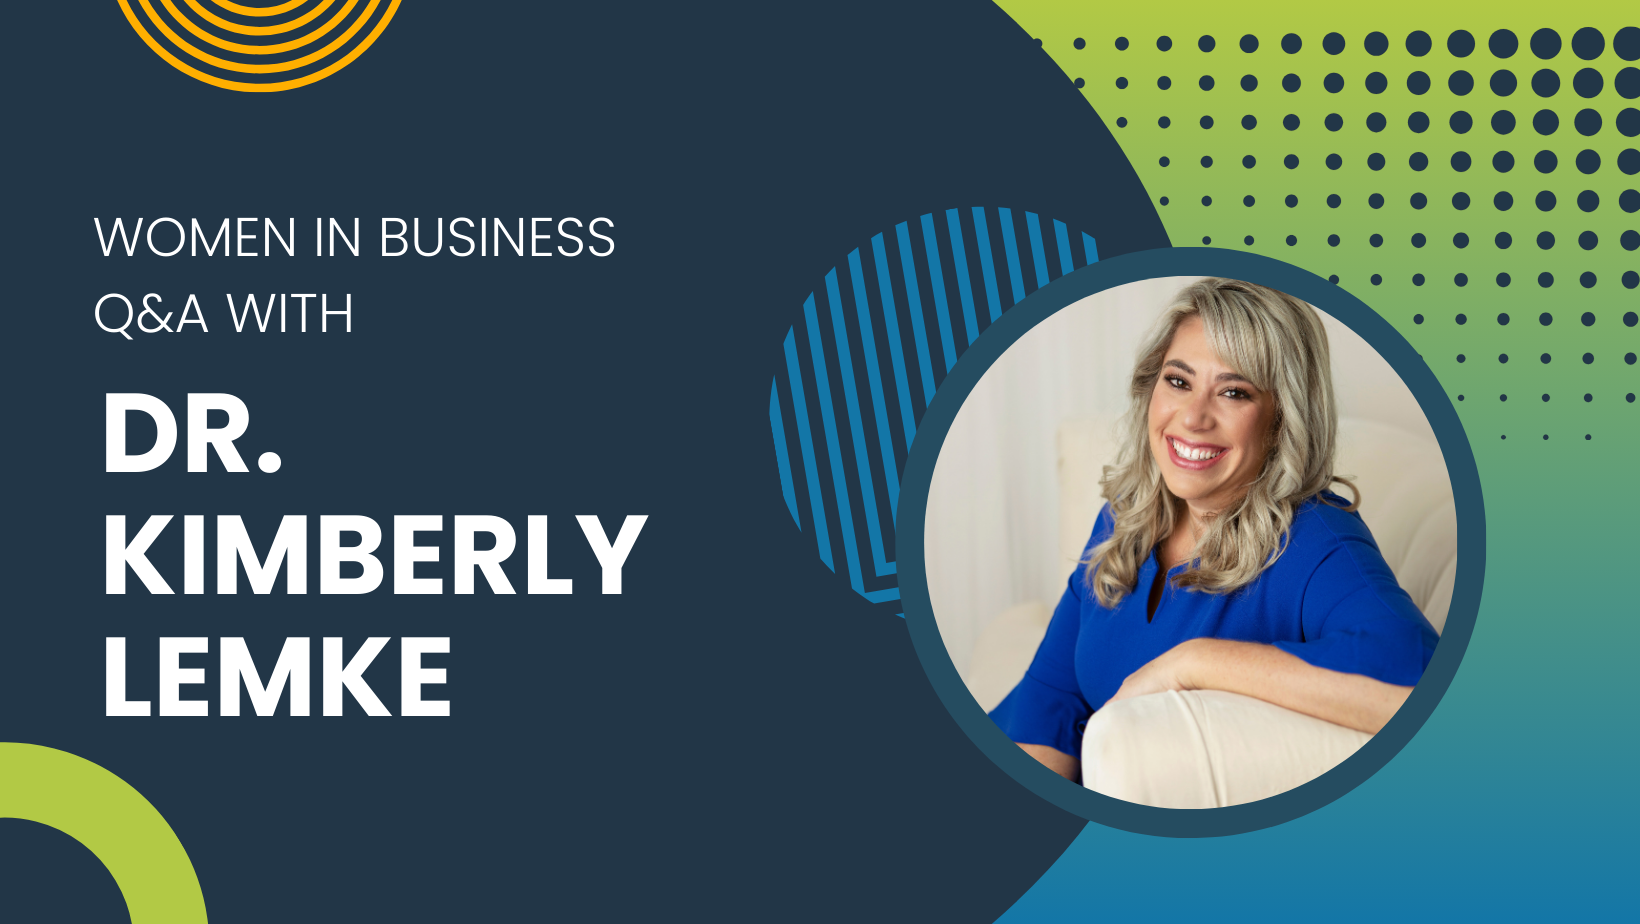 Women in Business: Q&A with Dr. Kimberly Lemke graphic